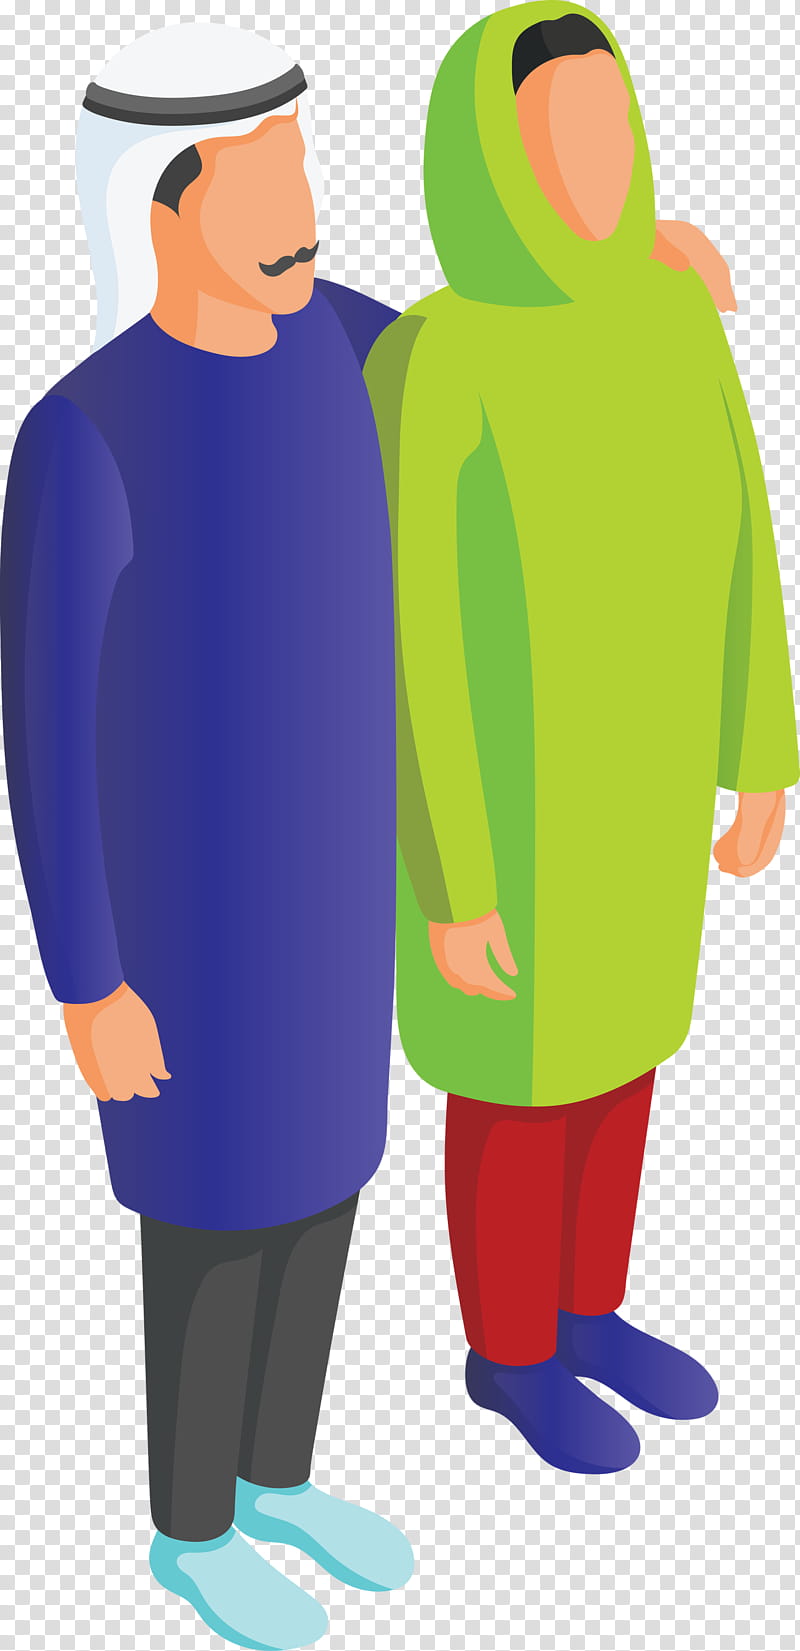 Arabic Family Arab people Arabs, Clothing, Standing, Costume, Outerwear, Sleeve, Electric Blue, Uniform transparent background PNG clipart